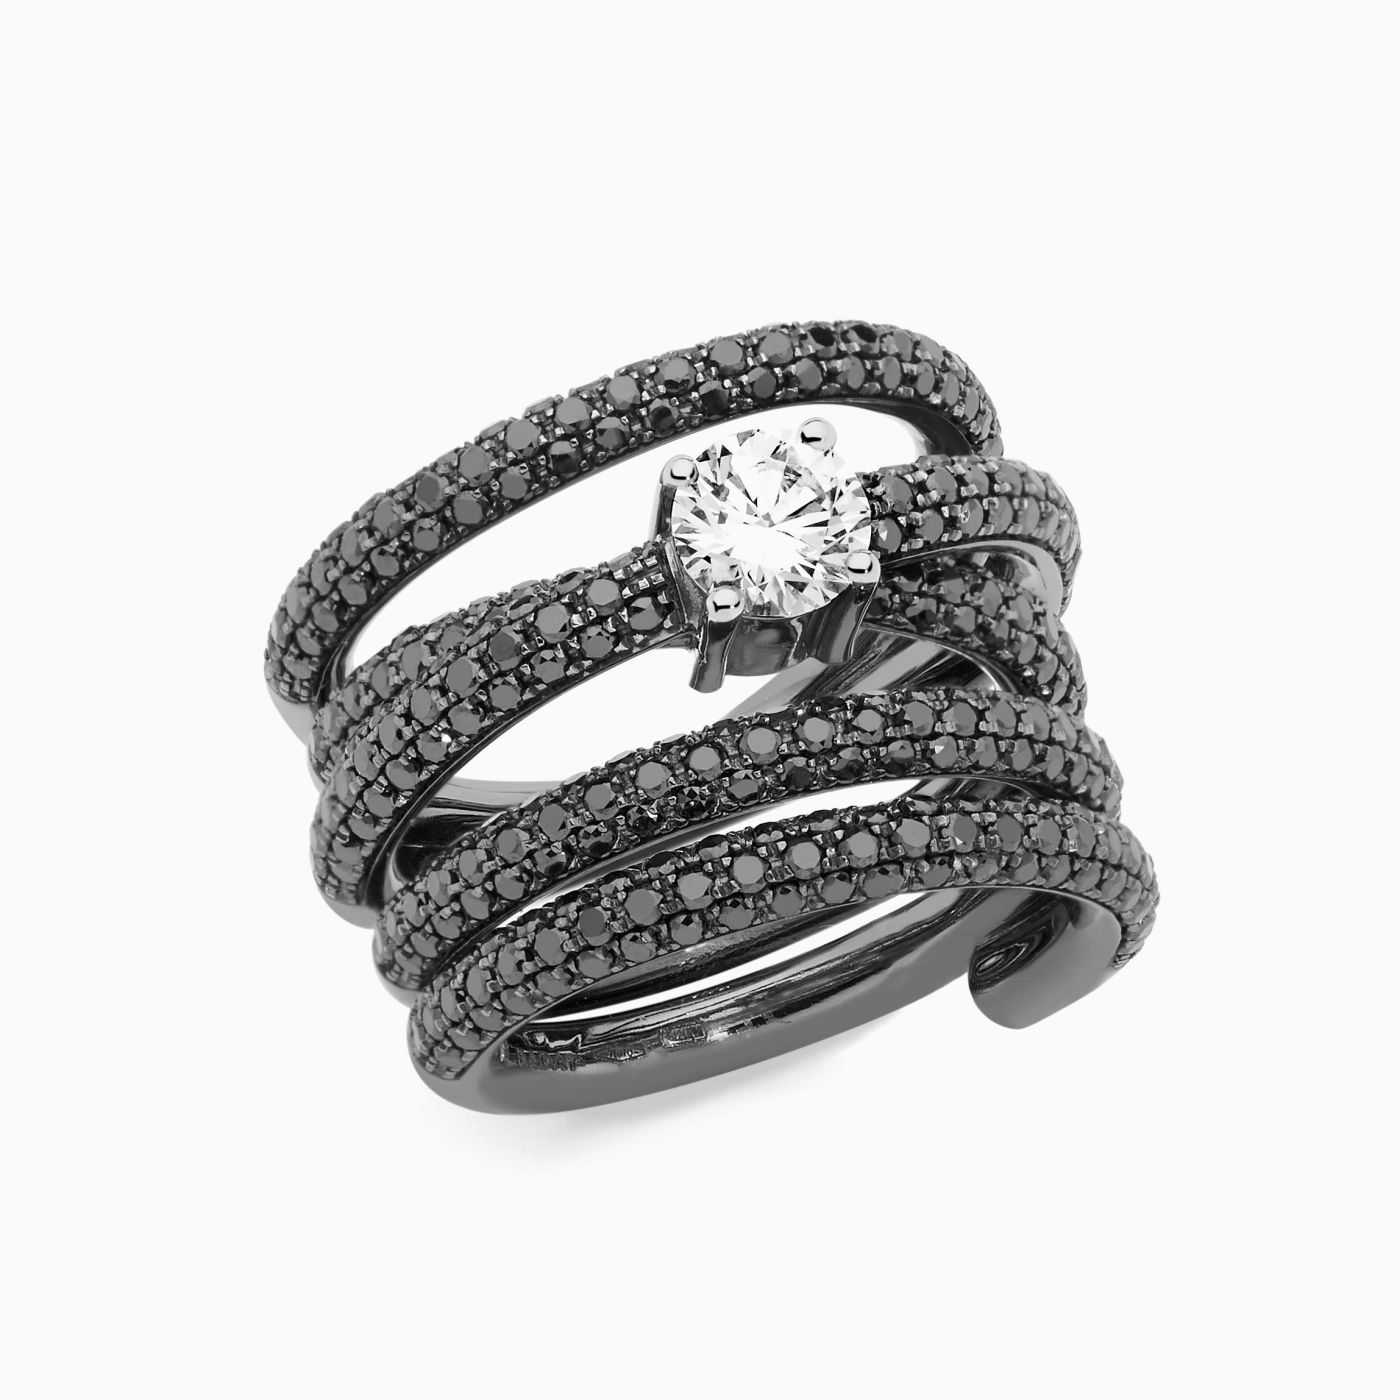 Black Gold Ring with Diamonds